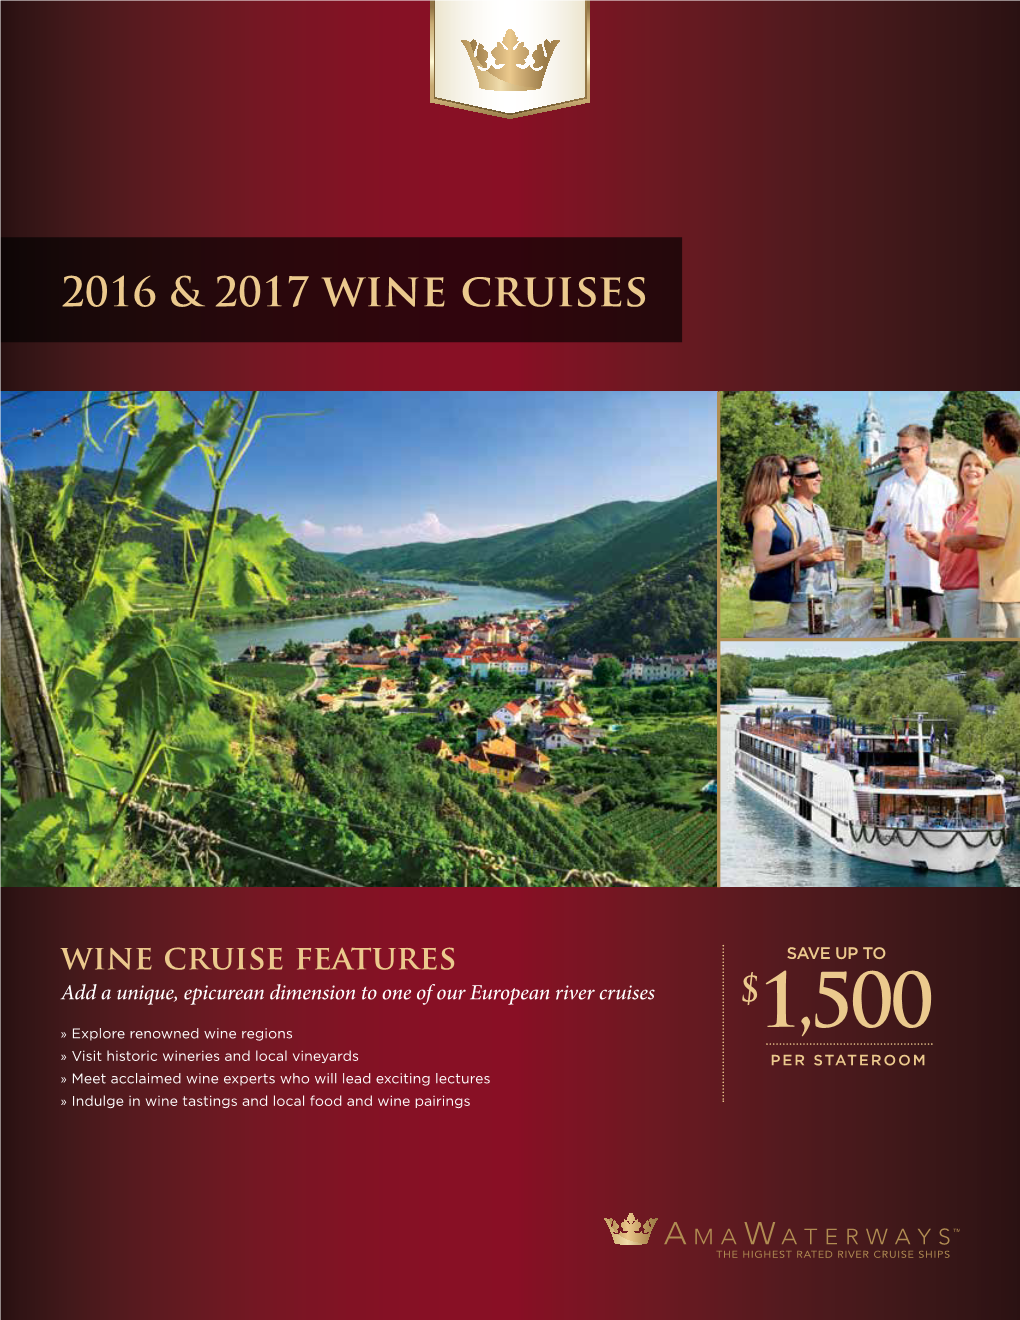 Wine Cruise Features